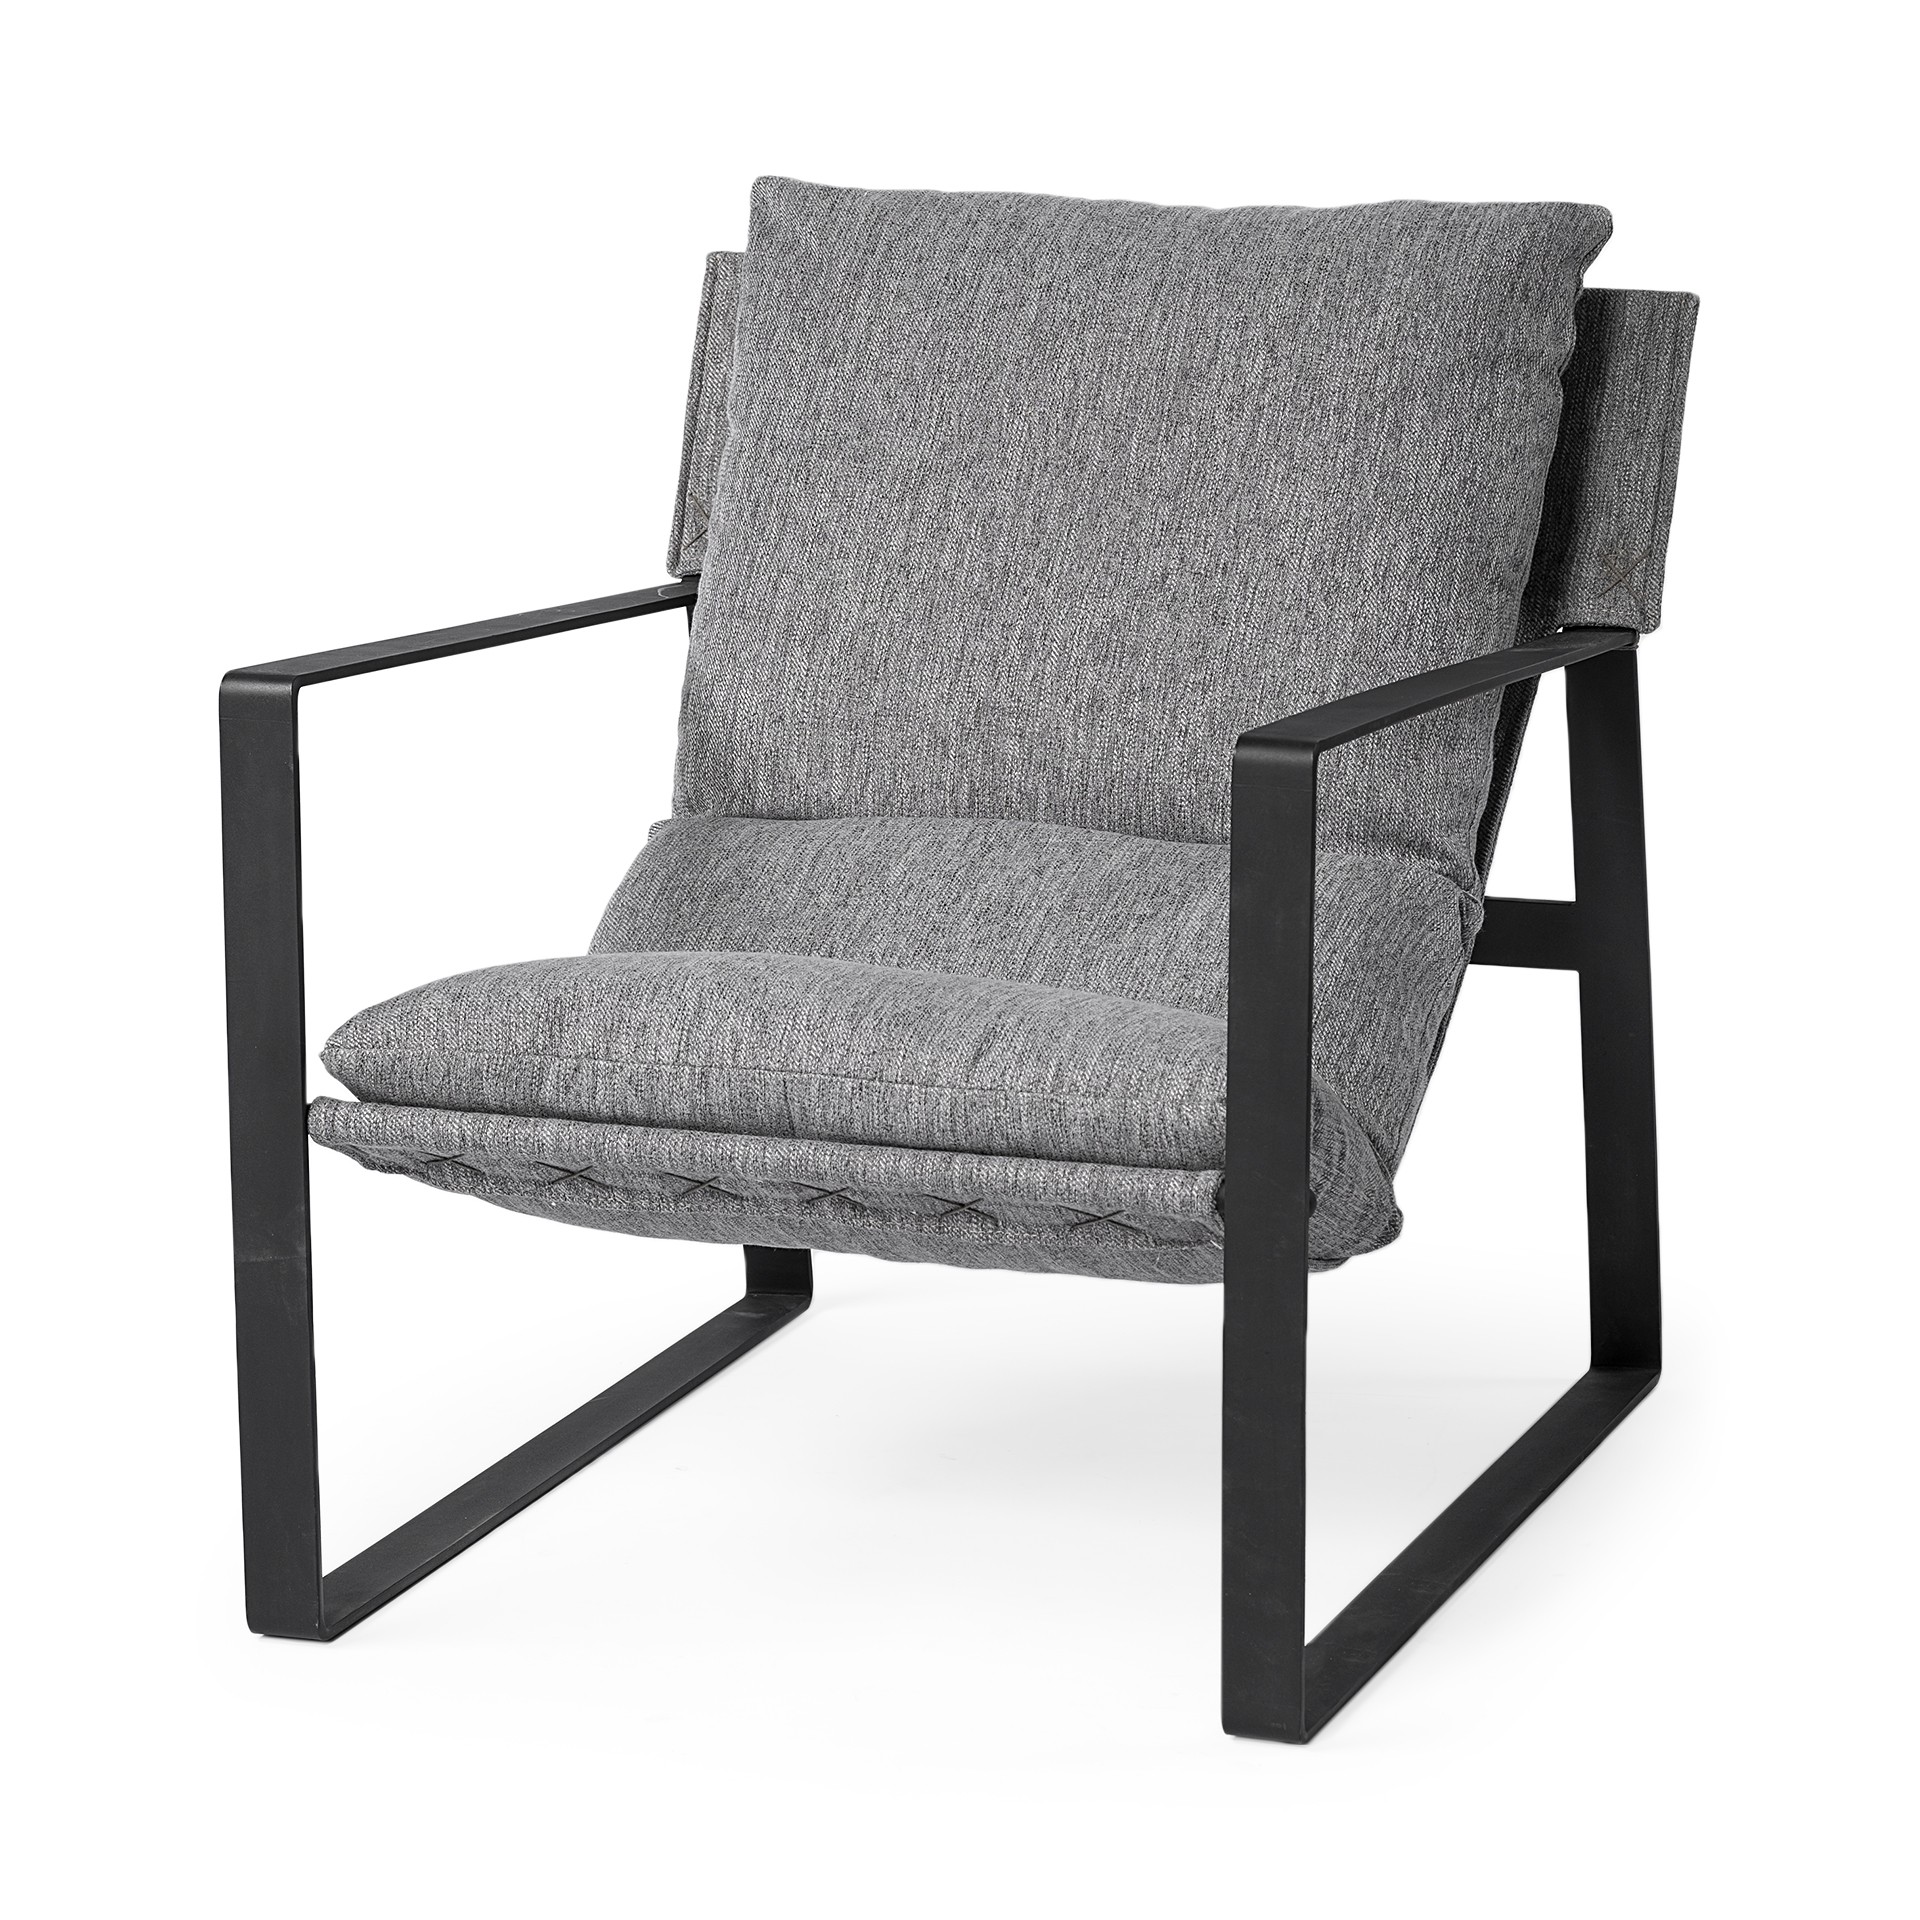 Stone Gray And Black Metal Sling Chair-392003-1